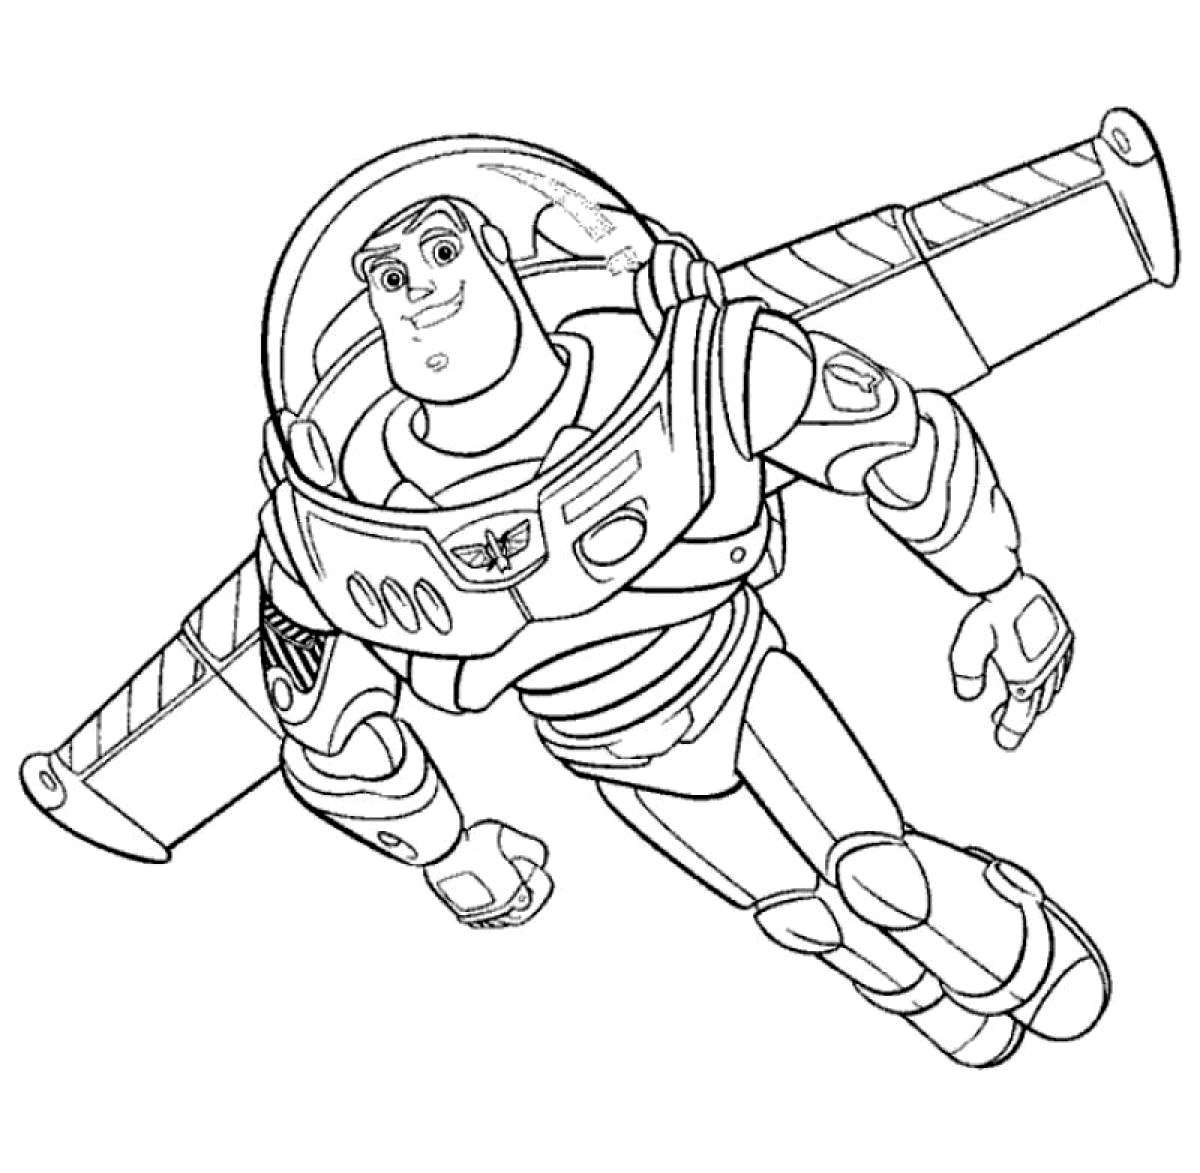 Printable Toy Story Coloring Pages – ColoringMe.com